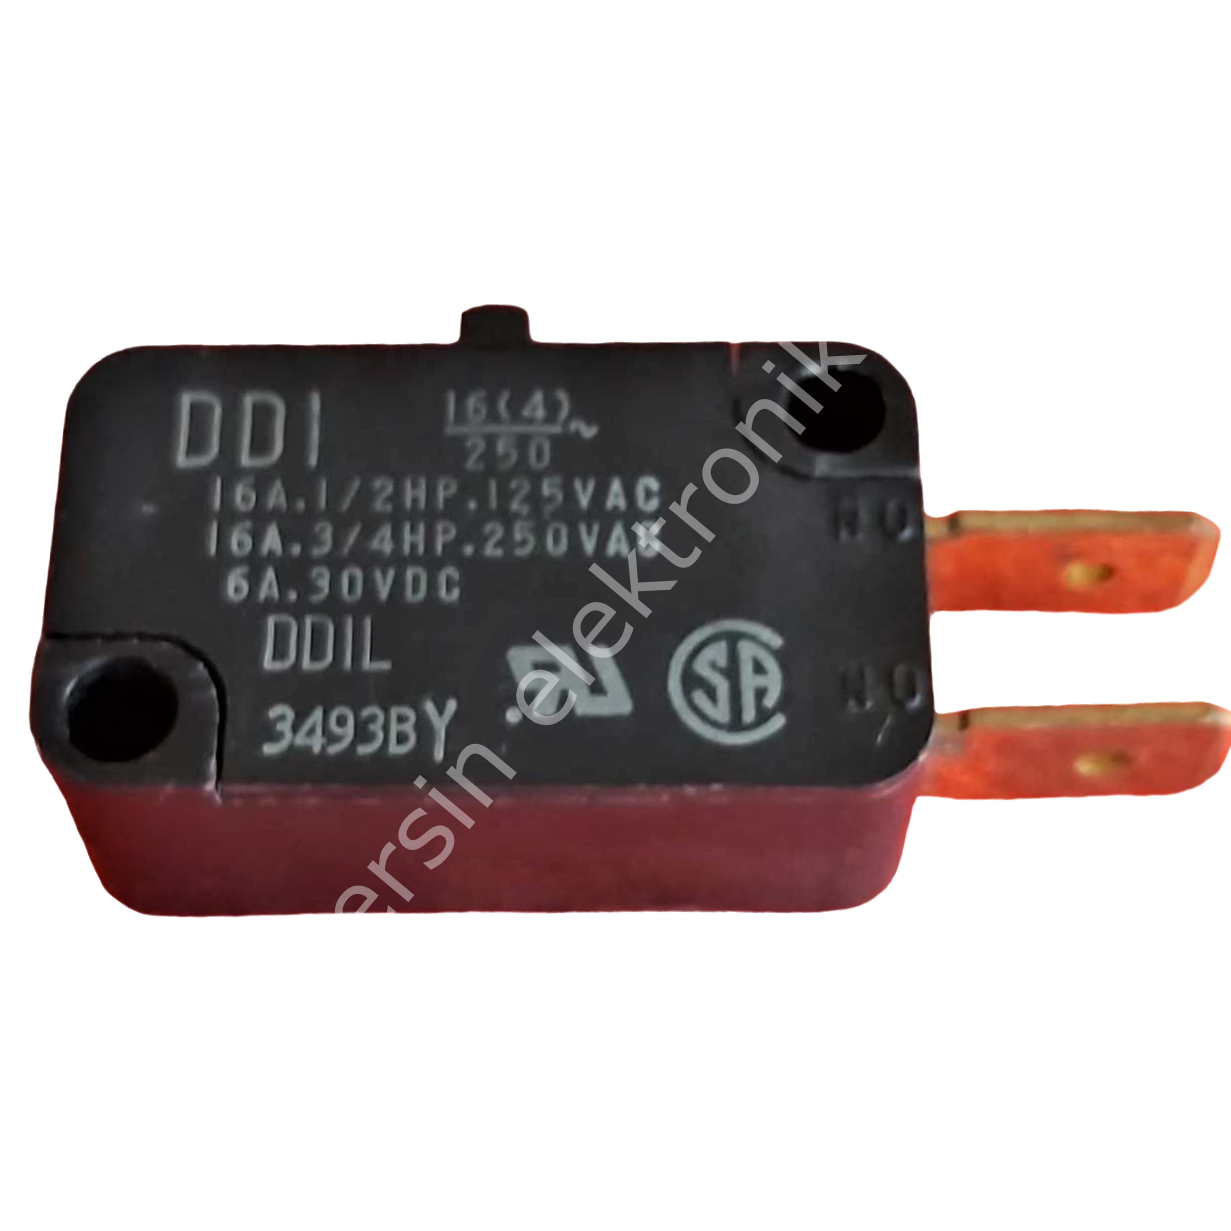 MICRO SWITCH DDIL 16A 1/2 HP MİKROSWITCH